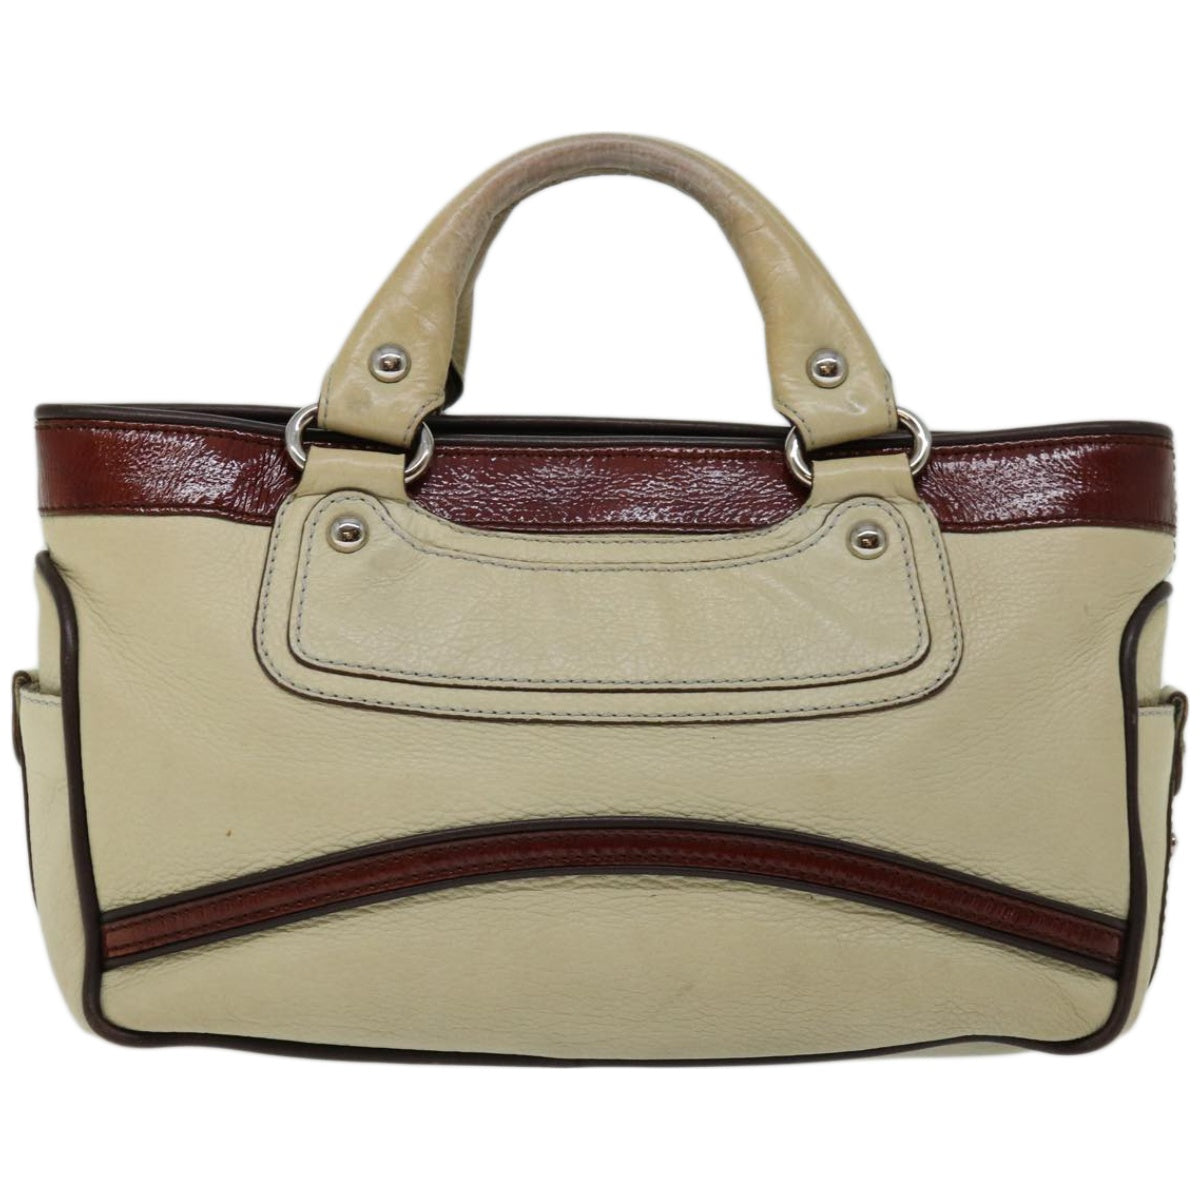 CELINE Hand Bag Leather Beige Auth bs12047 - 0